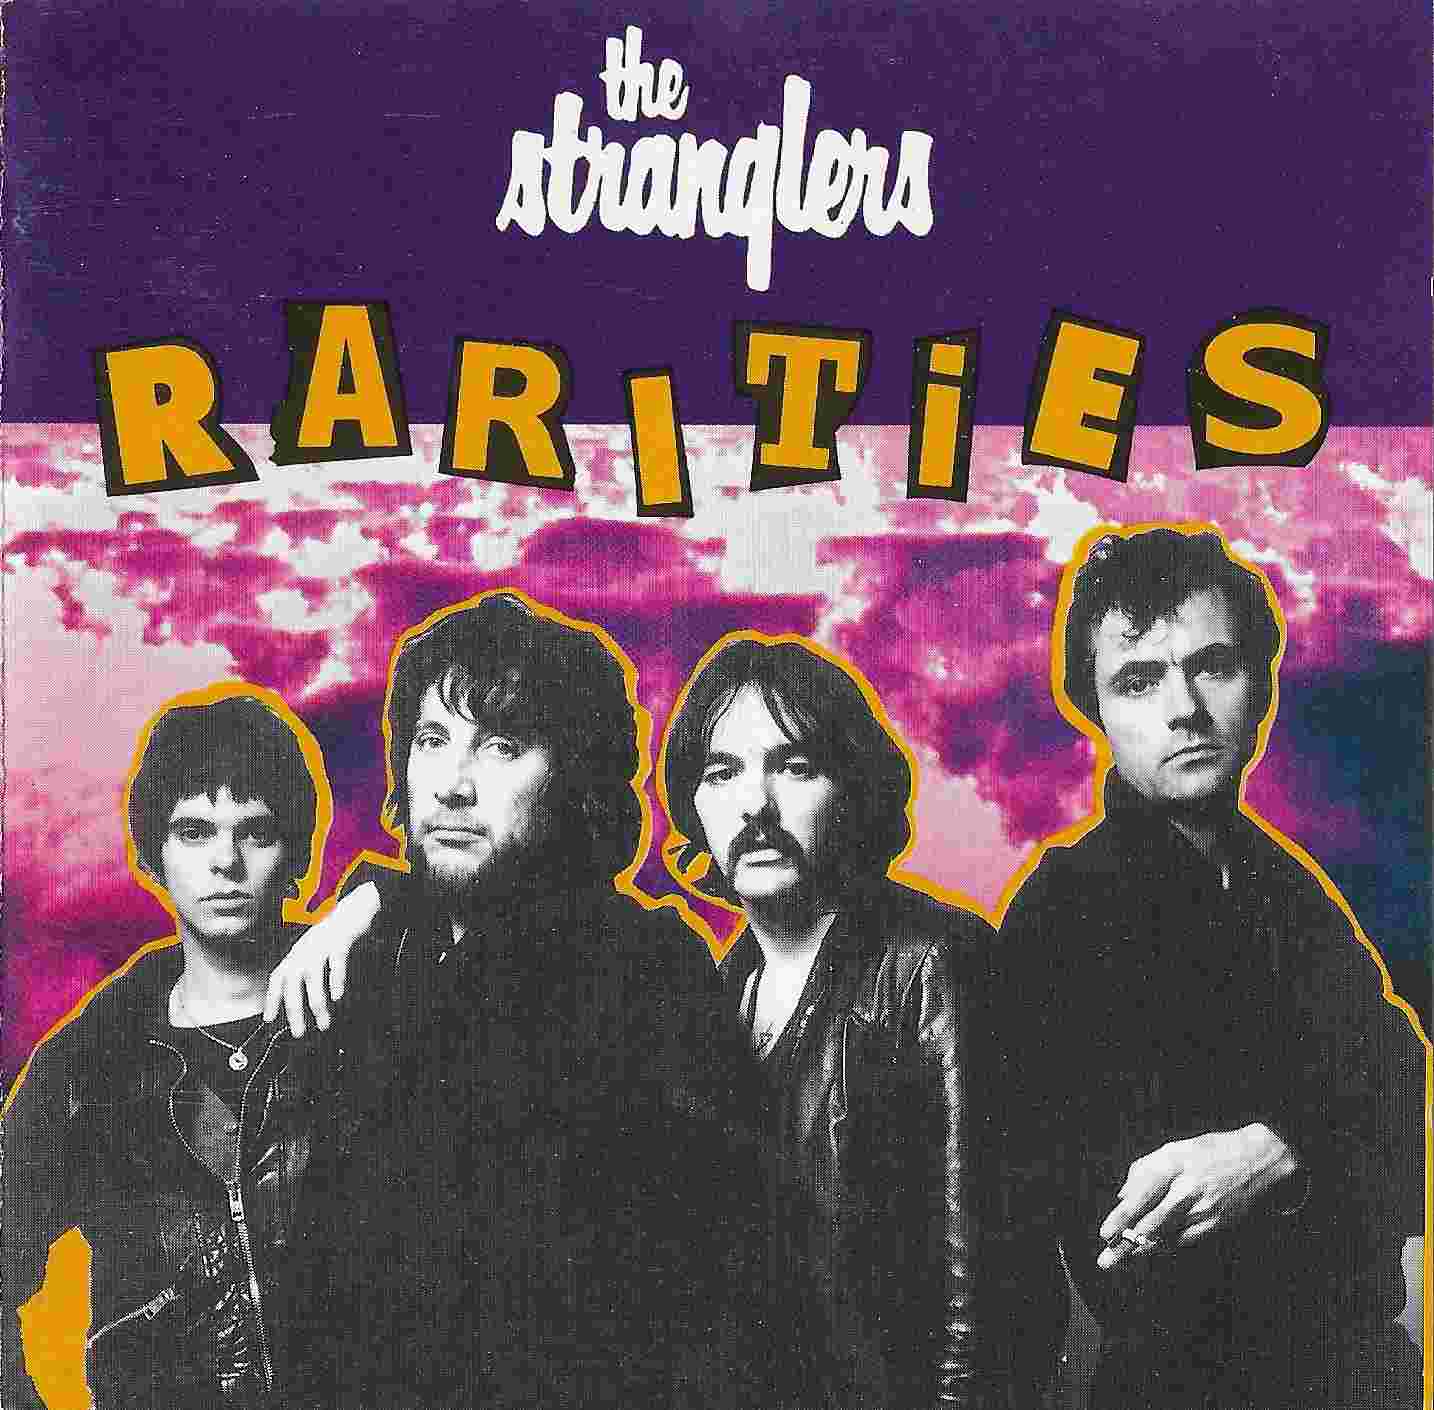 Picture of CDP 791072 2 Rarities by artist The Stranglers